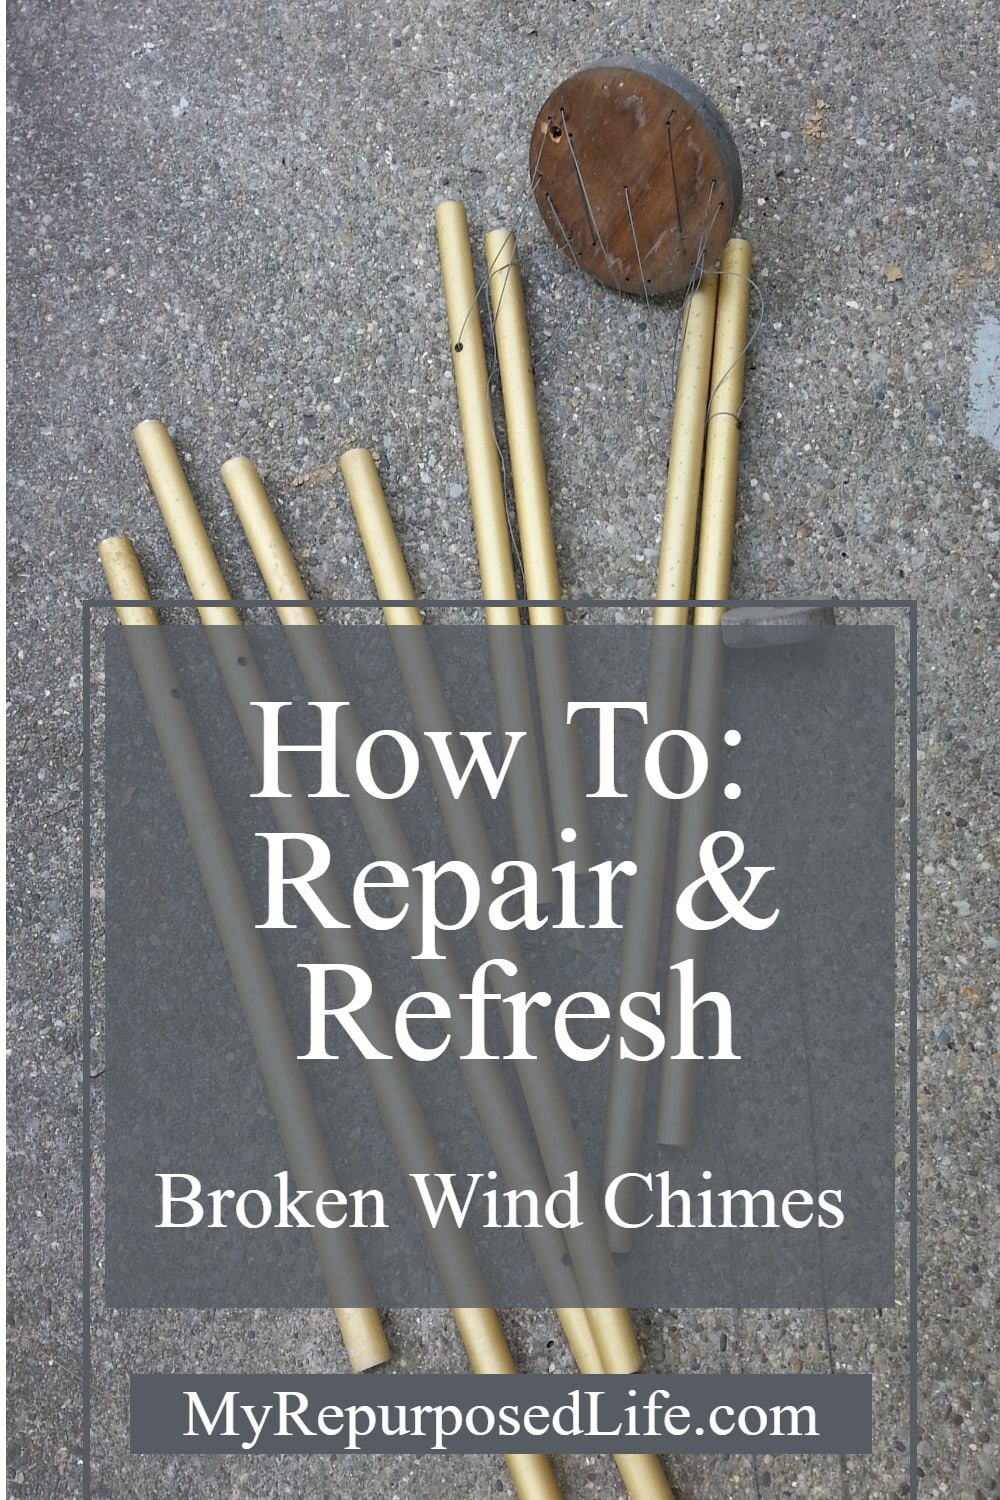 How to repair, refresh, restring a broken wind chime. Tips for the best string, paint and stain to use to save that old wind chime. #MyRepurposedLife #broken #windchime #makeover #spraypaint #stain #minwax #krylon via @repurposedlife